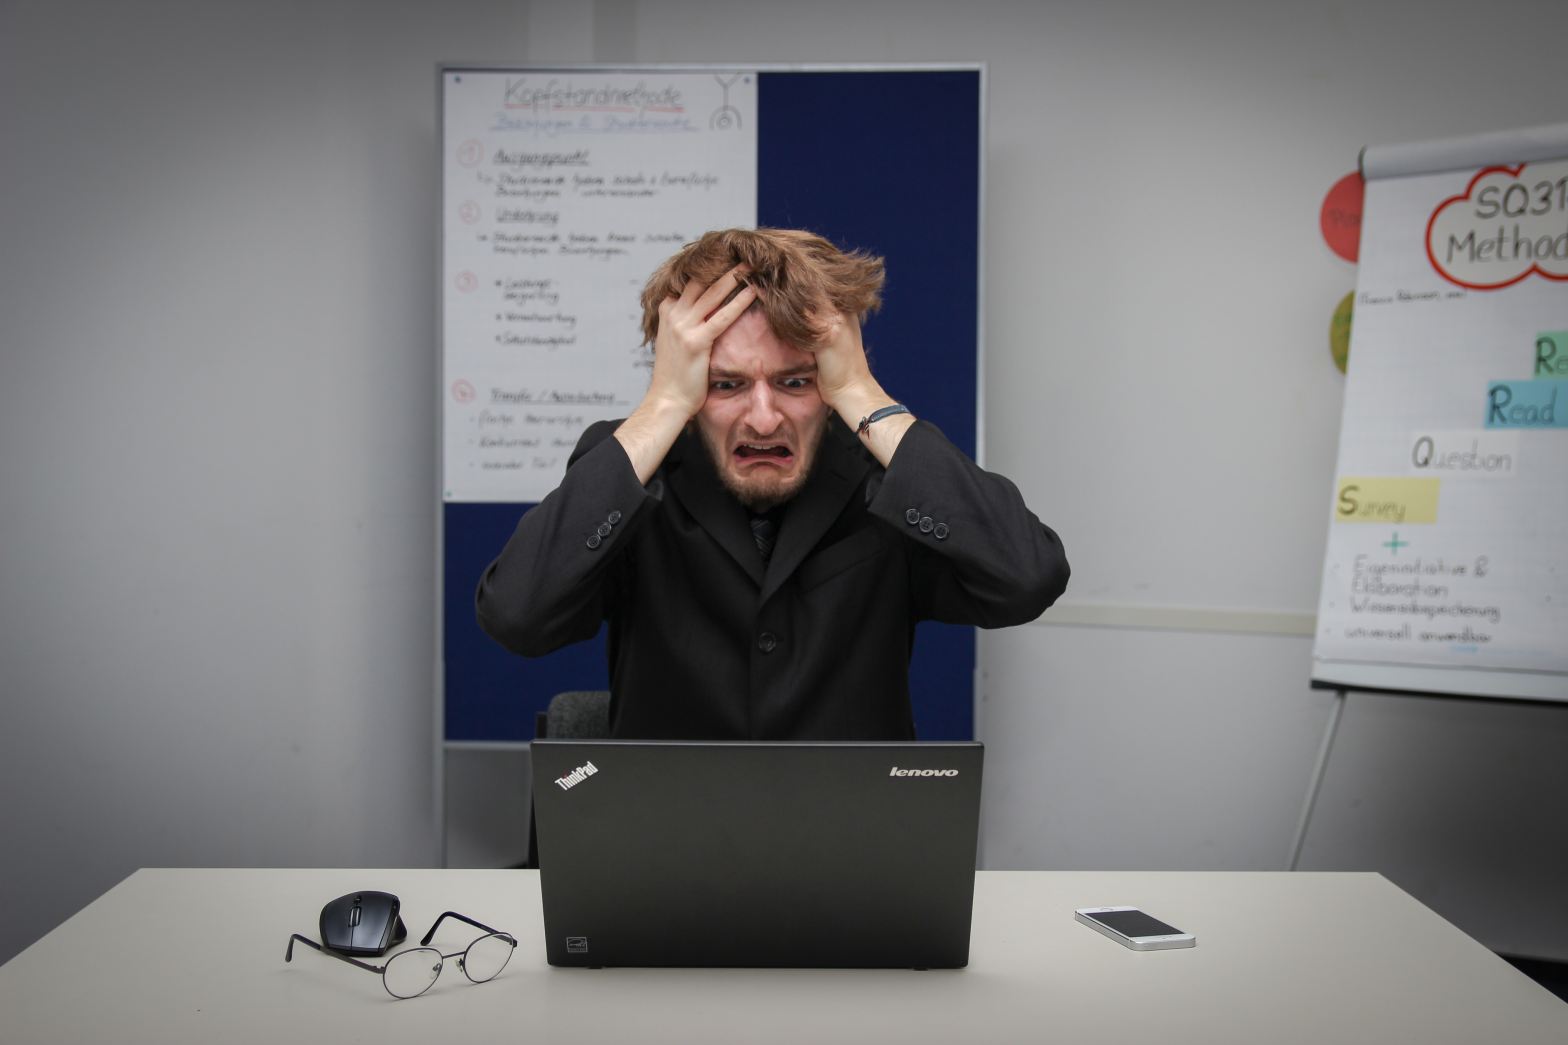 30-something white man in black business clothes with hands to head and upset look on face in front of laptop